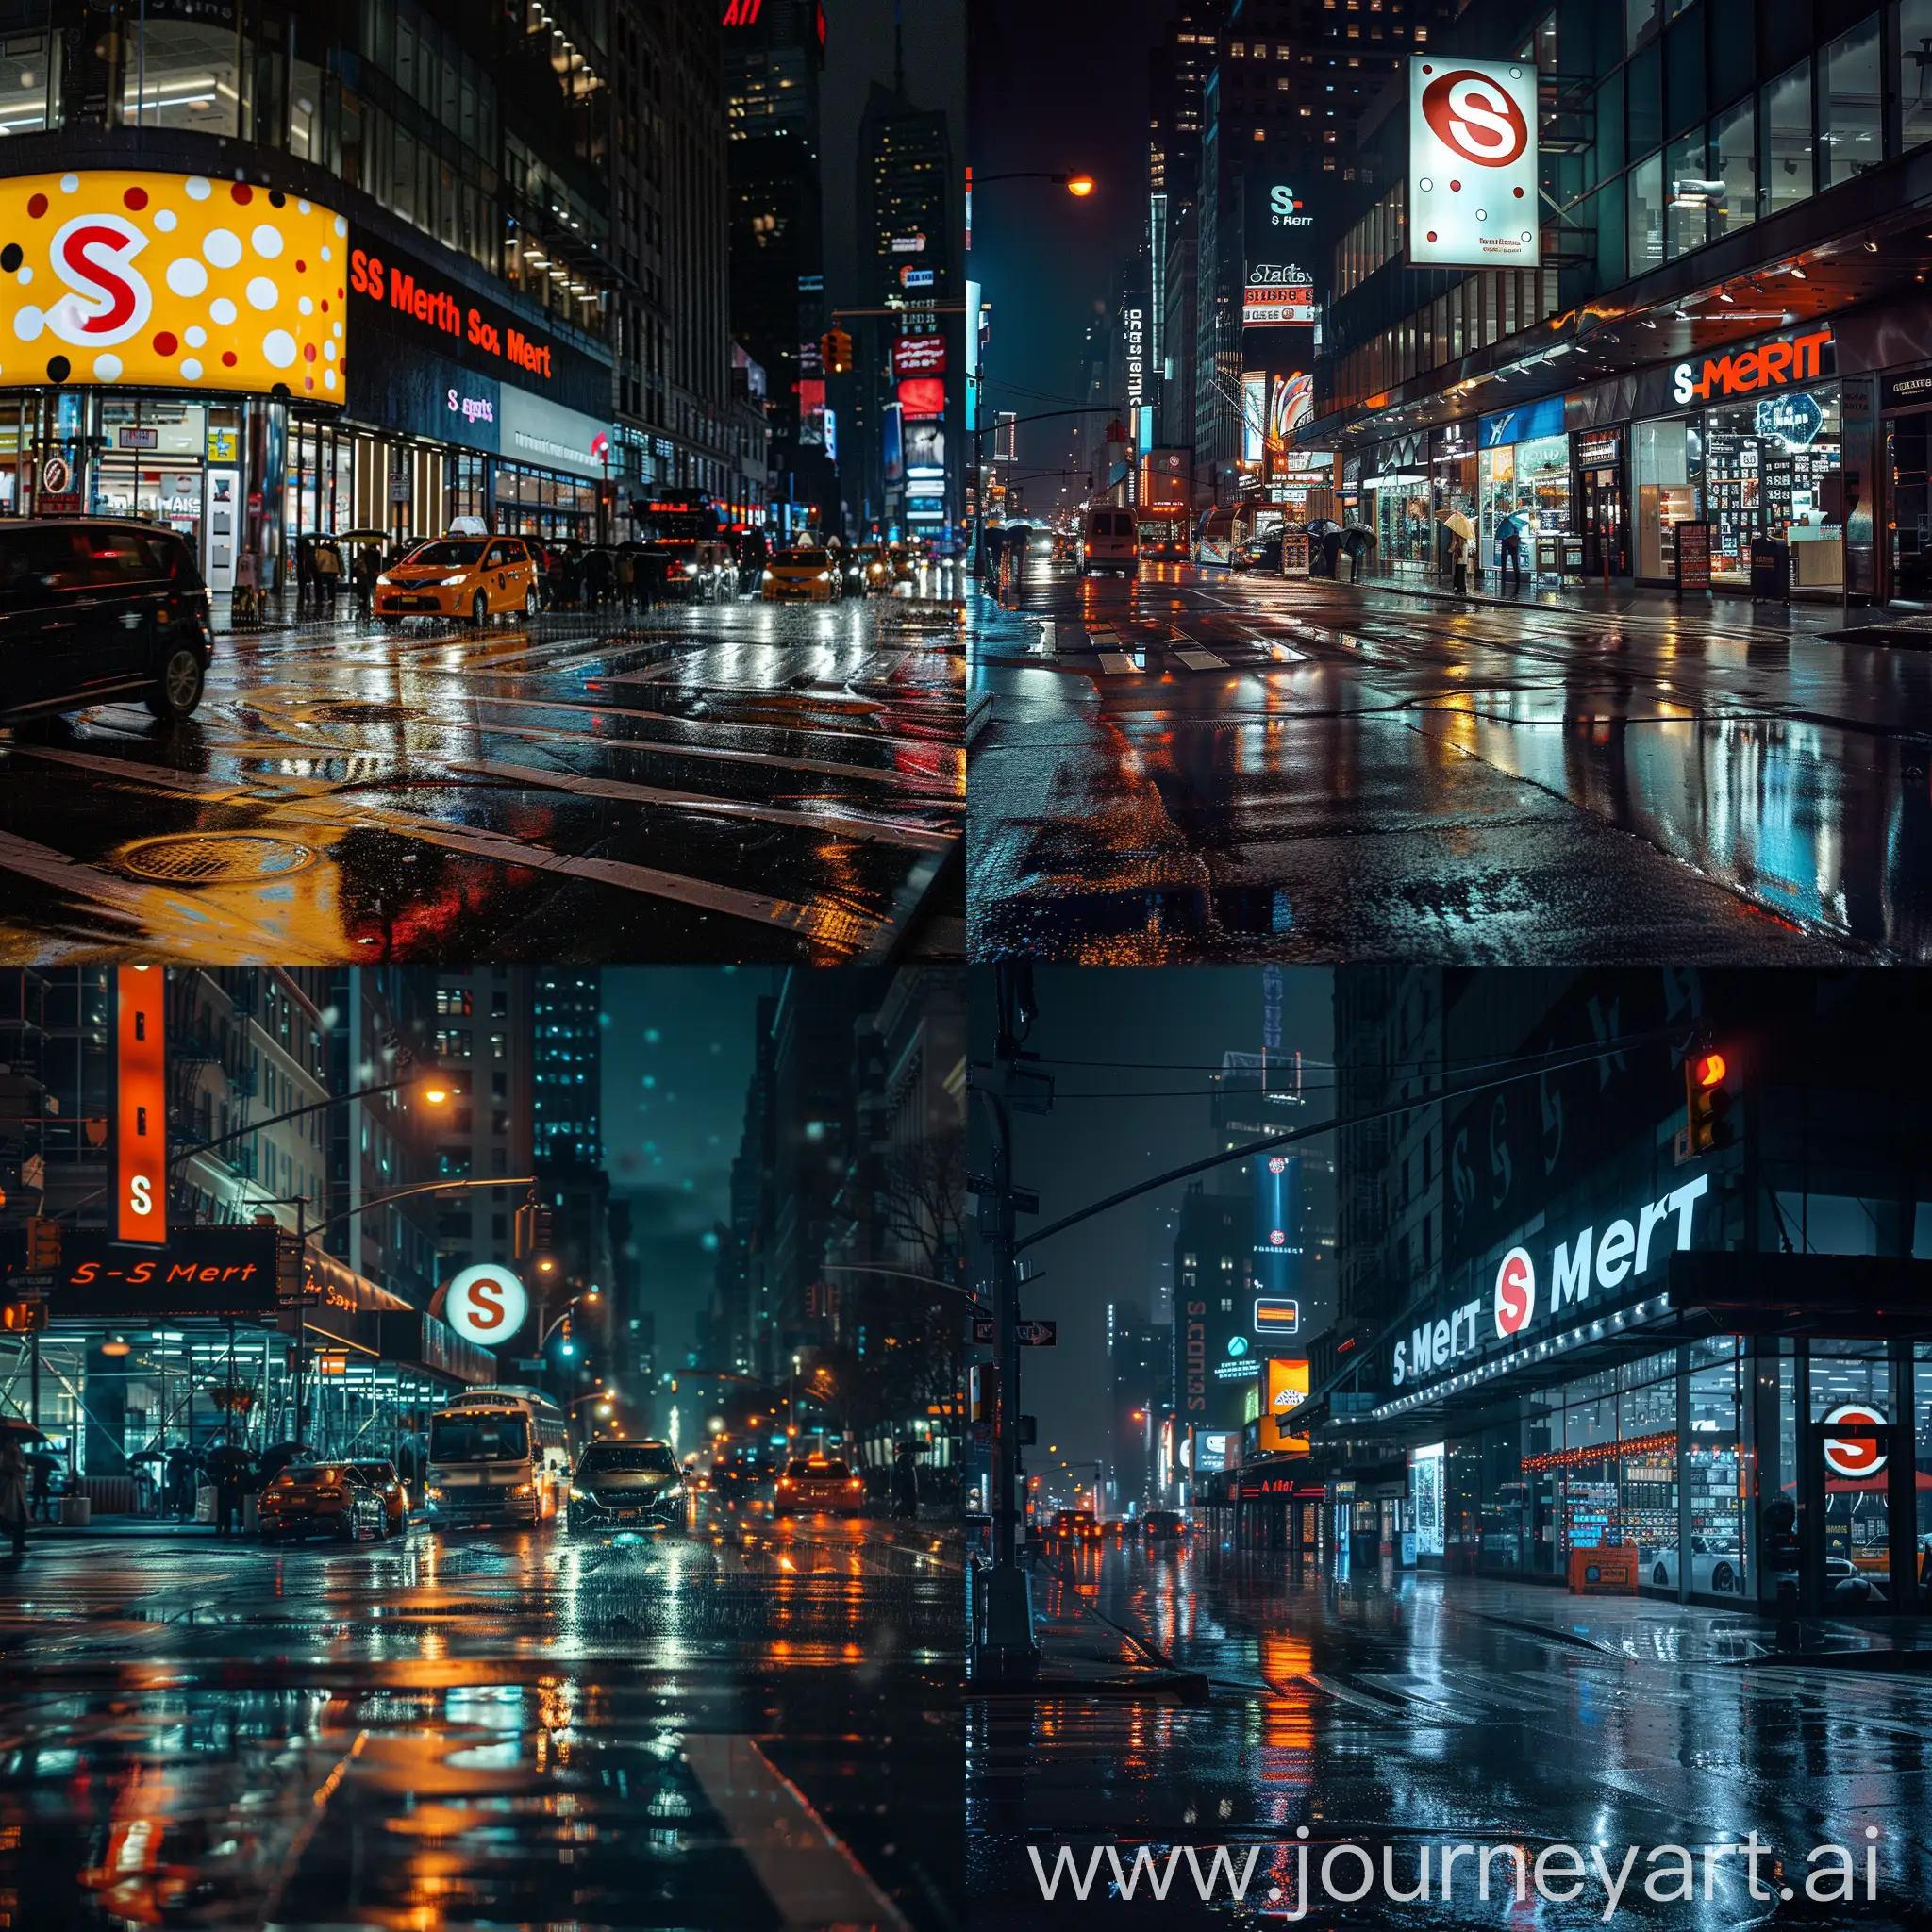 A photo of a rainy night in New York, where there is a store that sells technology gadgets and phones called "S mart" and its logo is a white and red dot circle.